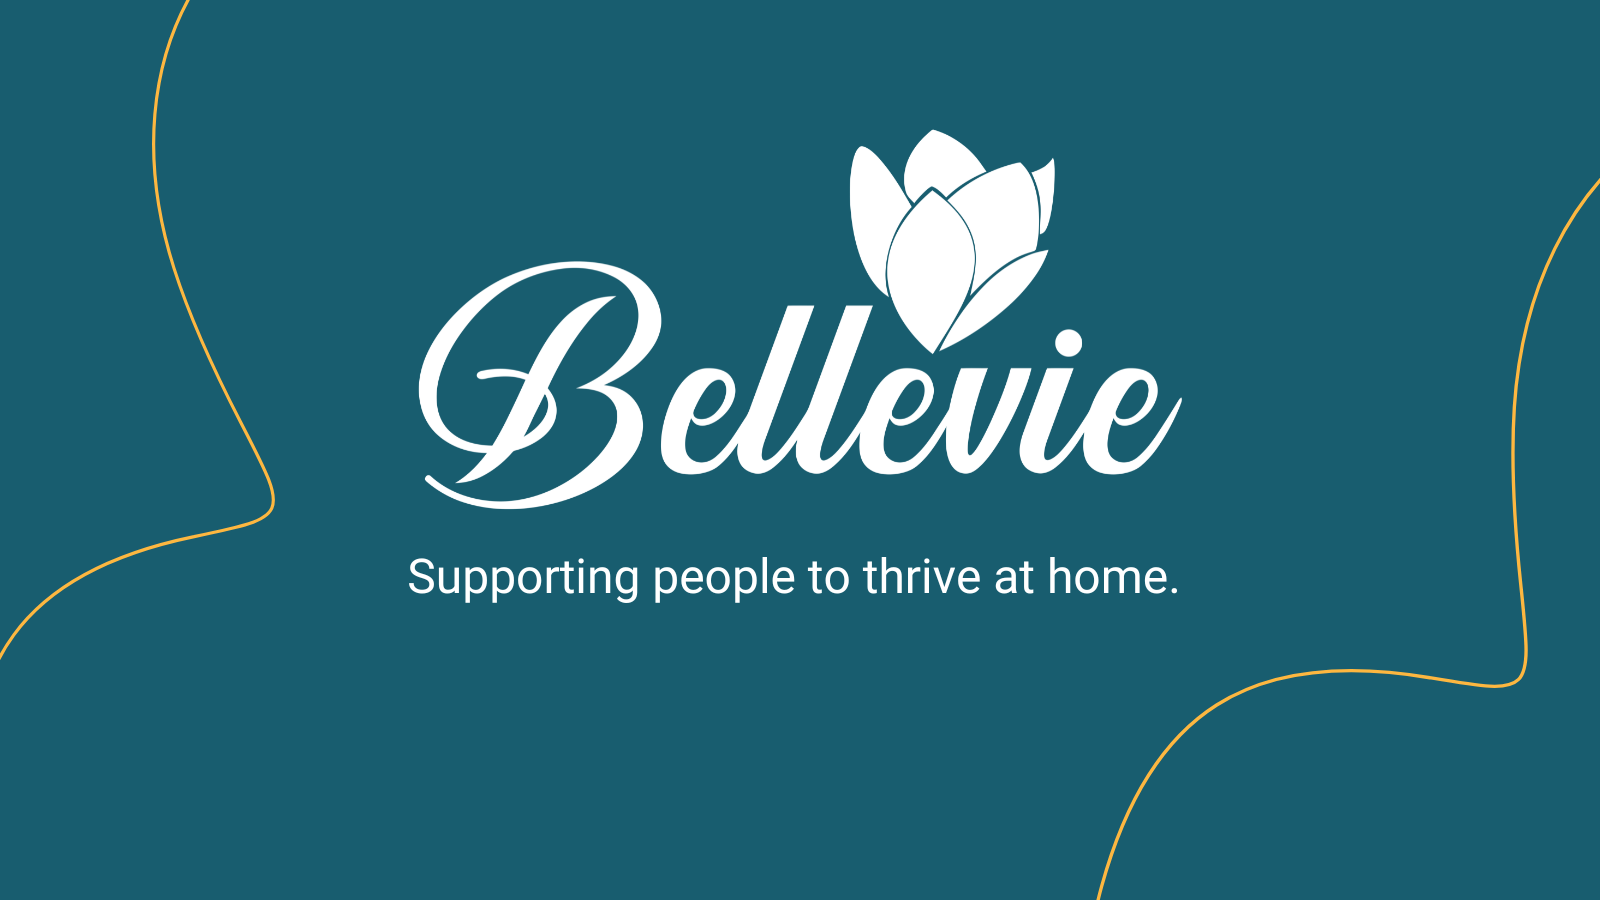 BelleVie raises £2.1 million in seed funding and grants to boost award-winning care model across the UK